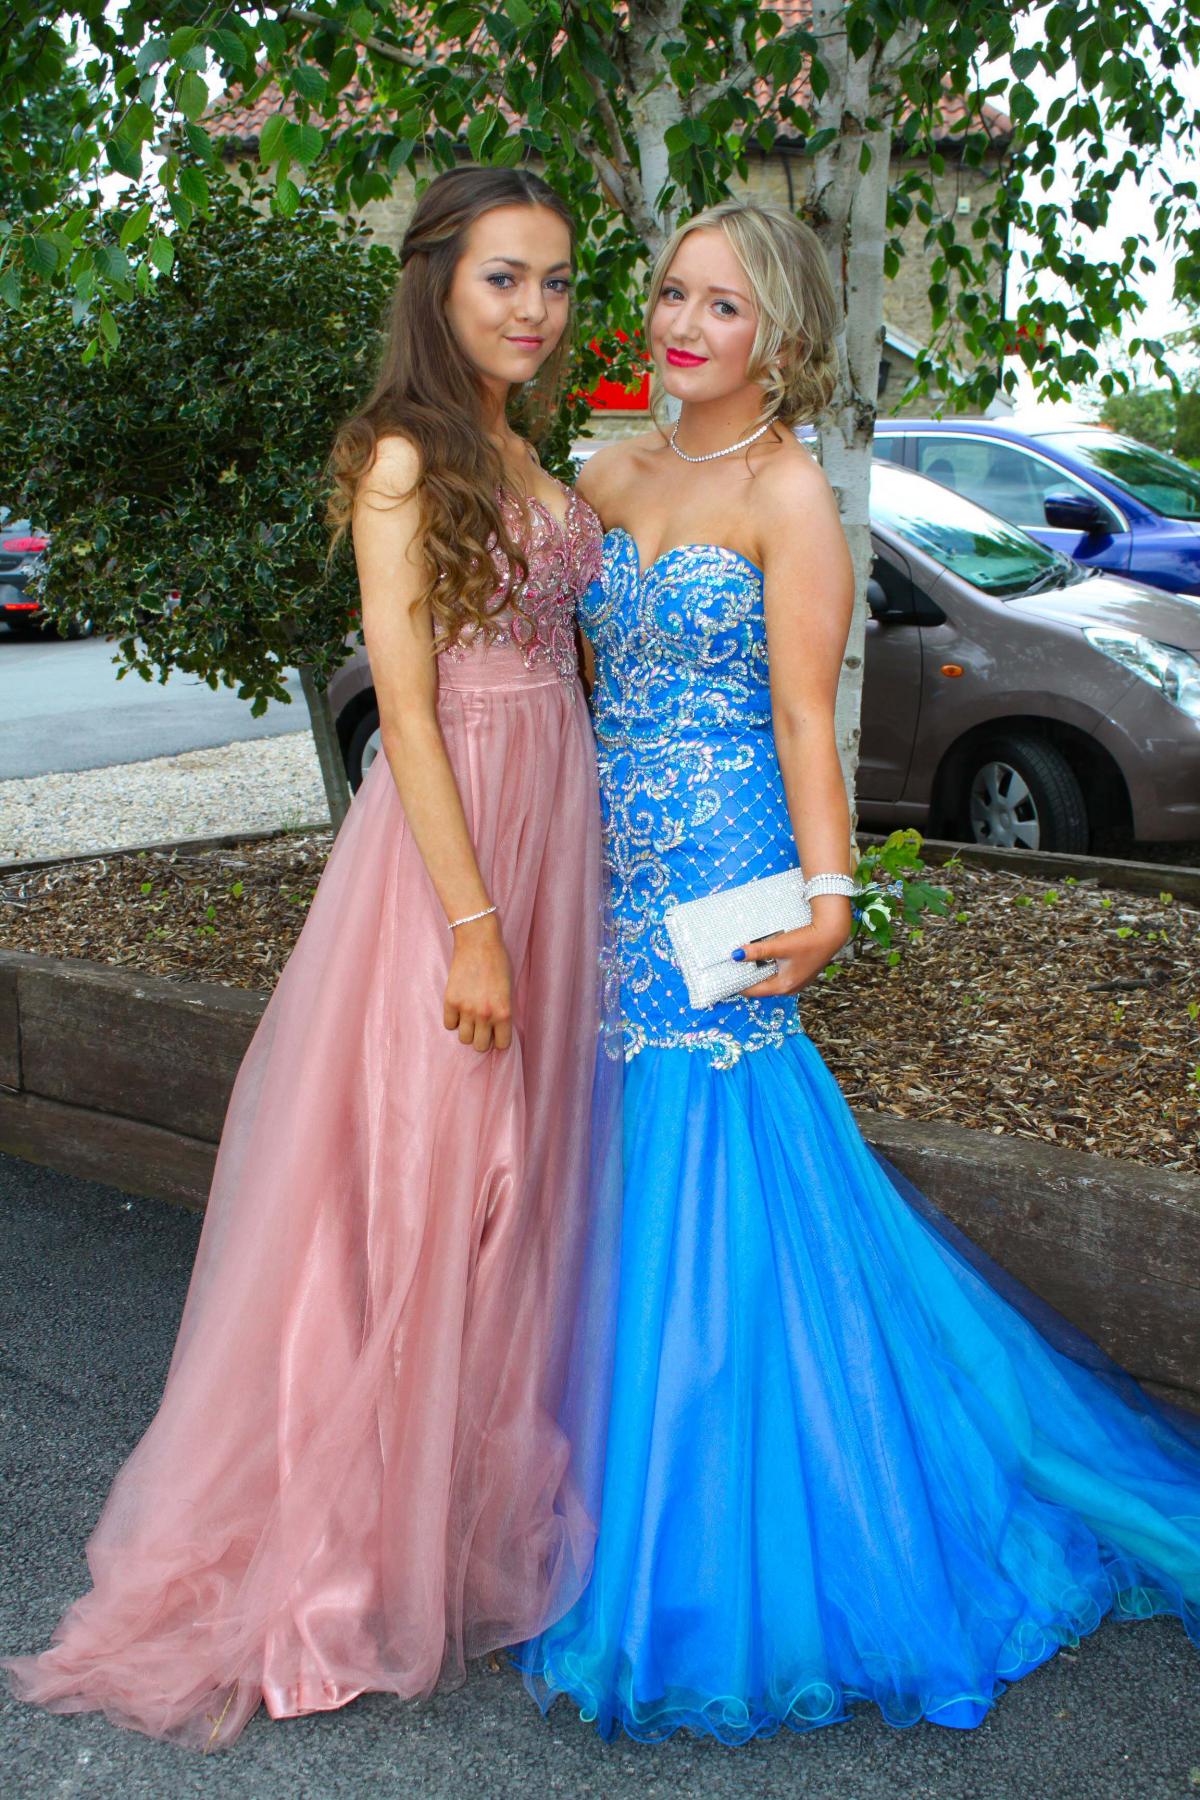 Abbie Waistell, 16 and Kathryn Brown, 16